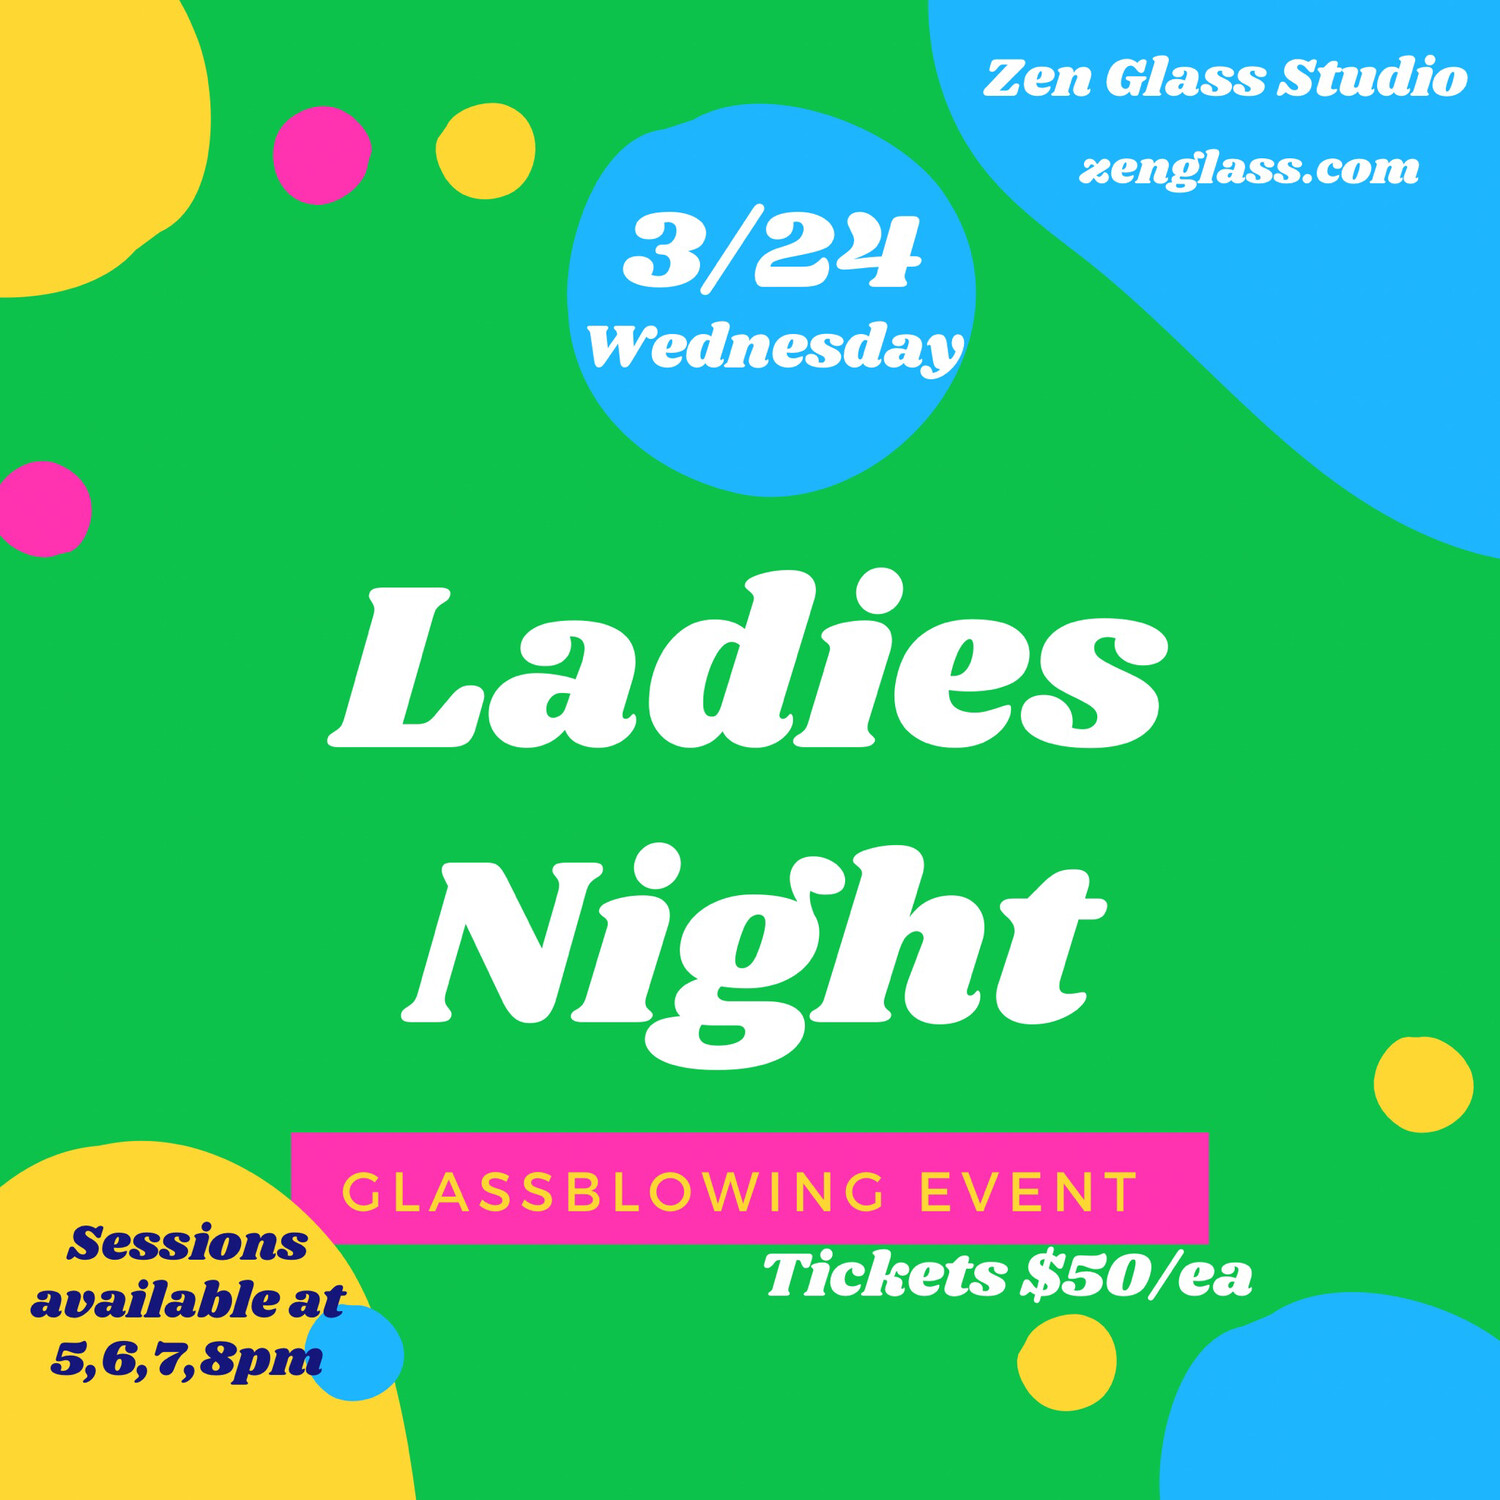 Ladies Night Wednesday March 24th 6pm